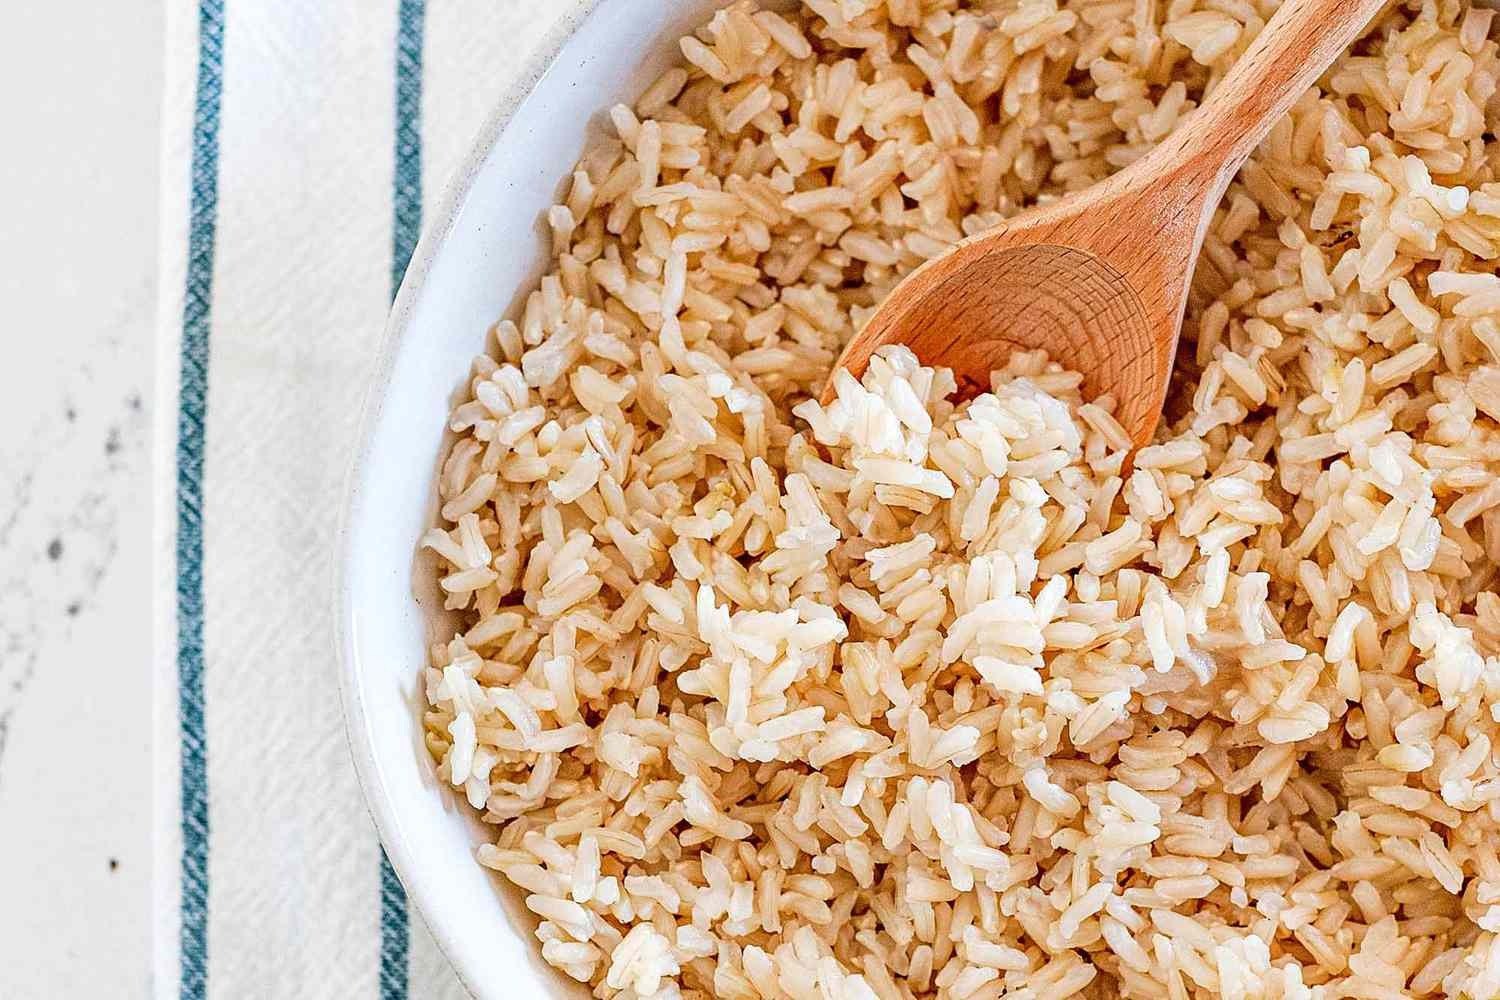 How To Cook Uncle Ben's Brown Rice 